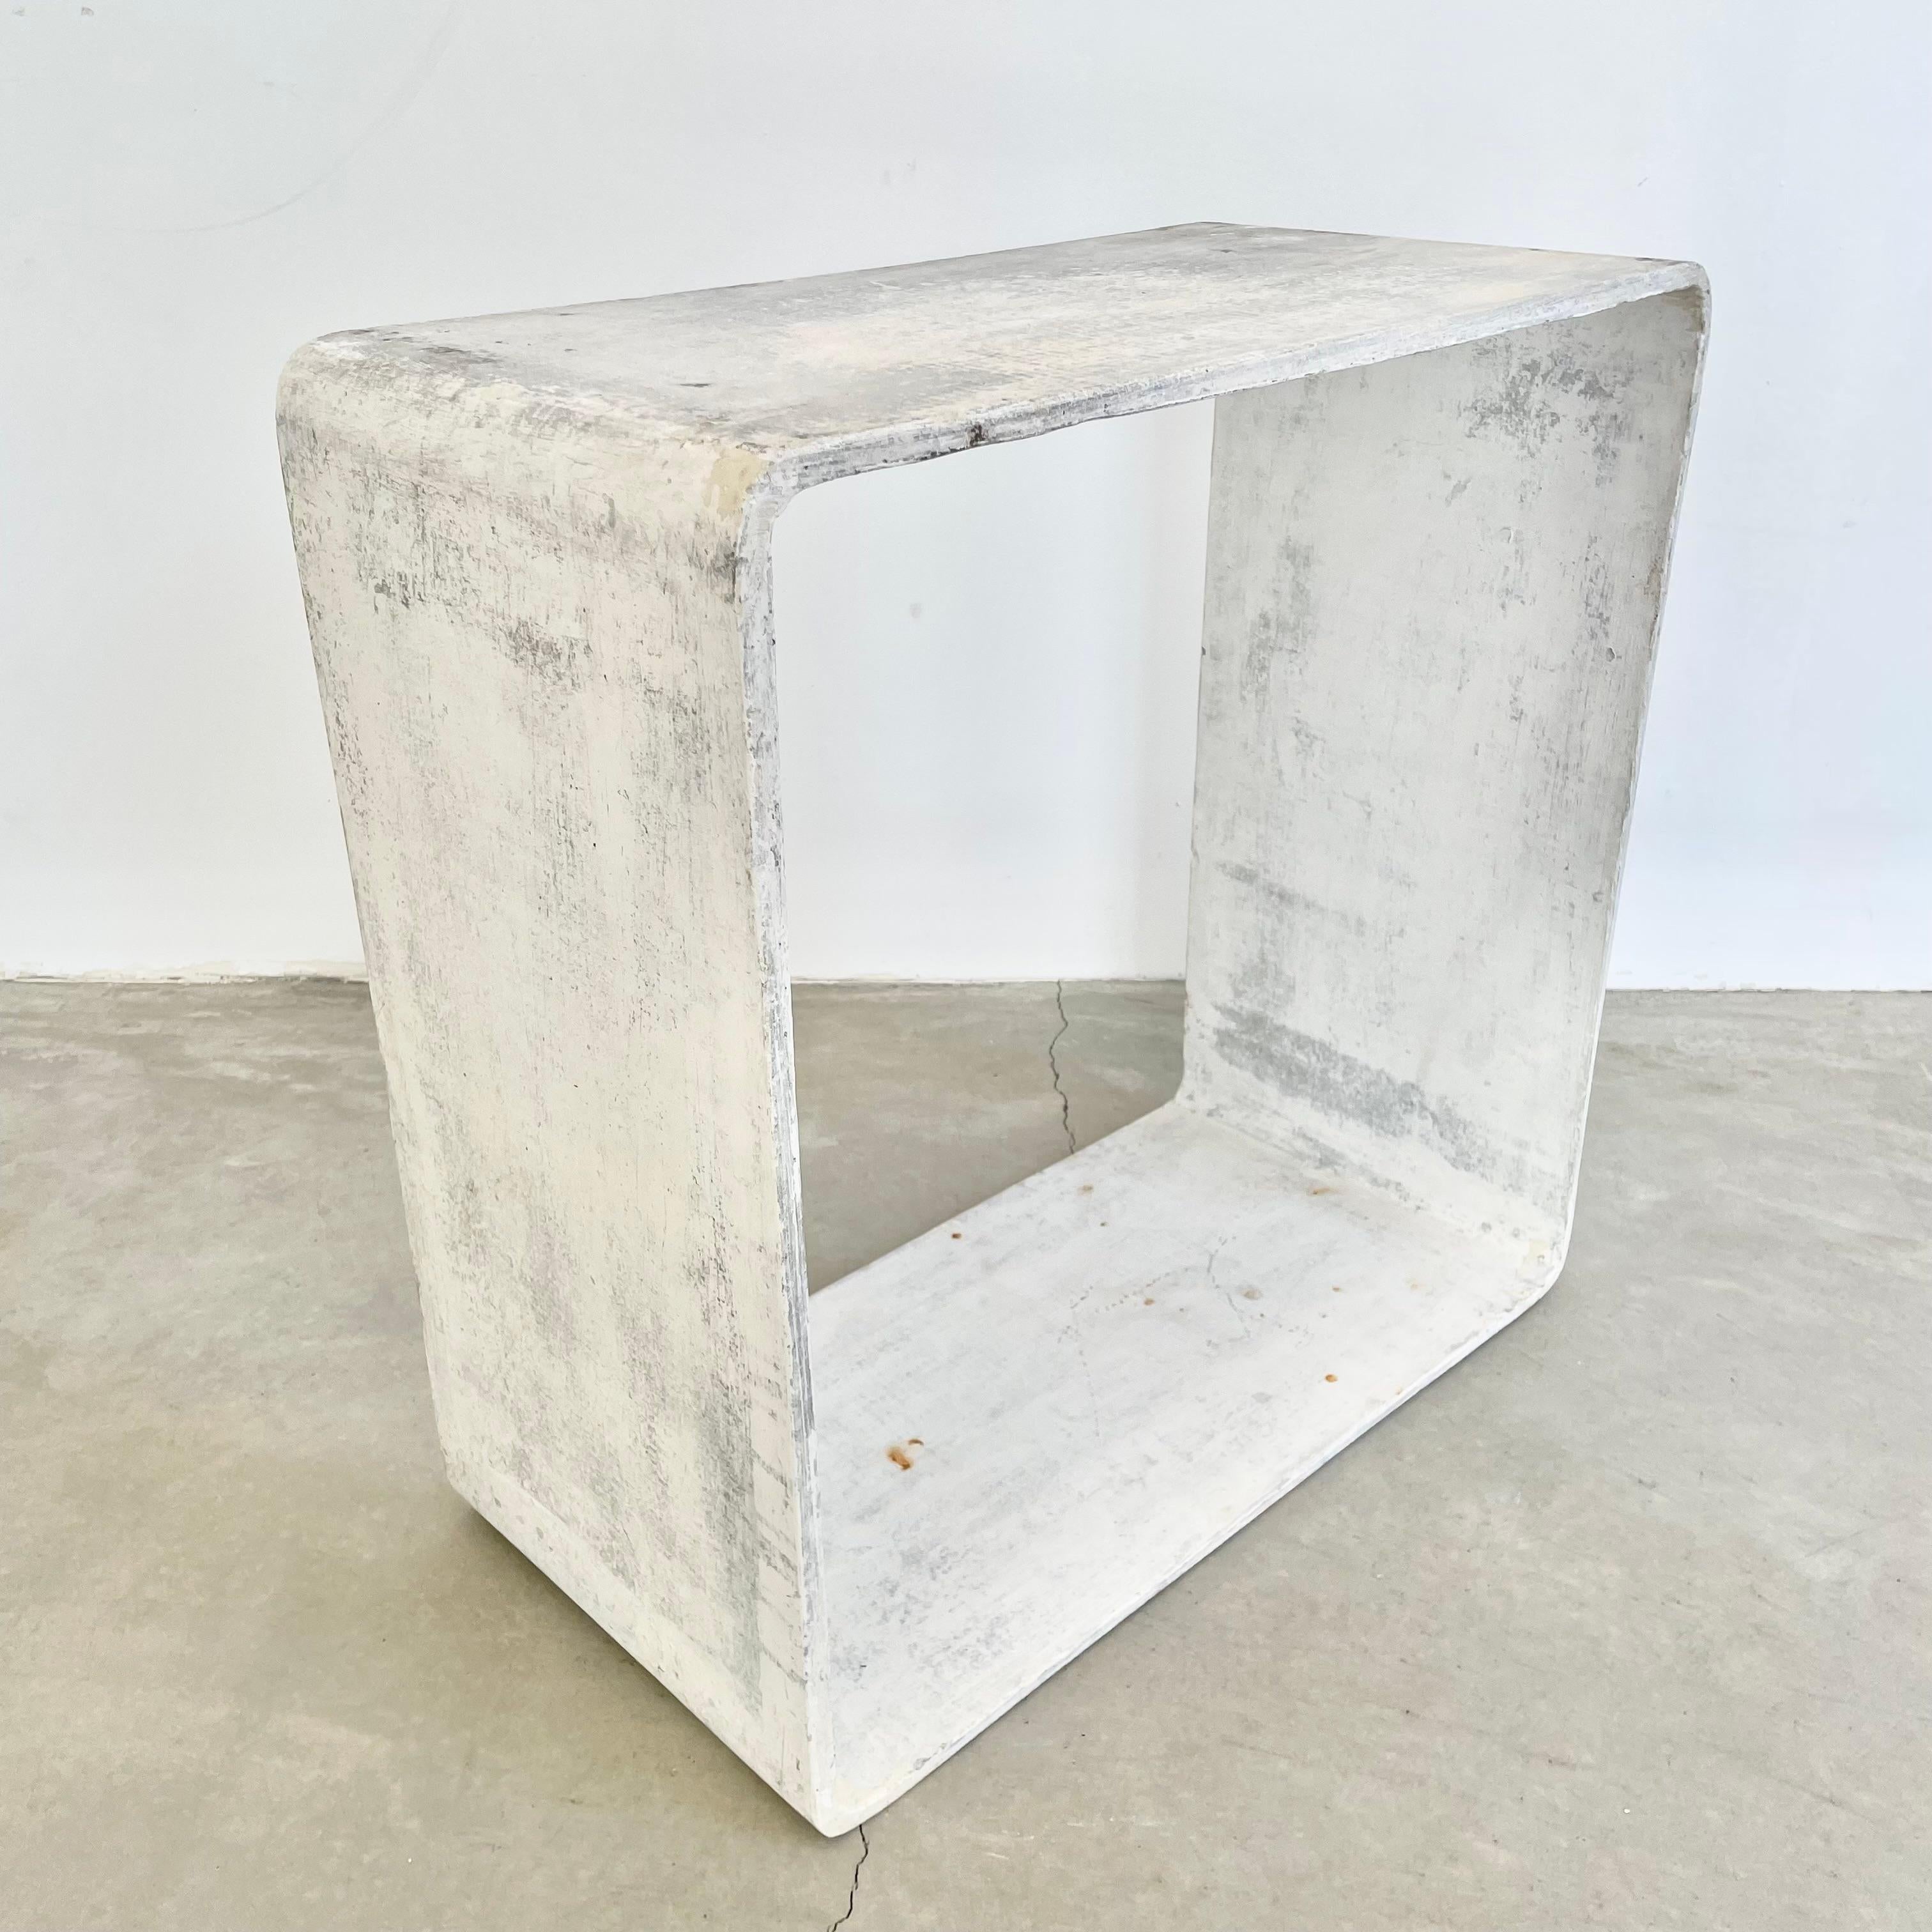 Fantastic modular fiber cement cube by Swiss Architect Willy Guhl, for Eternit. Amazing scale and patina to each cube. Great as a side table, for holding books or as a minimalist nightstand. Very good vintage condition. Two available. Priced